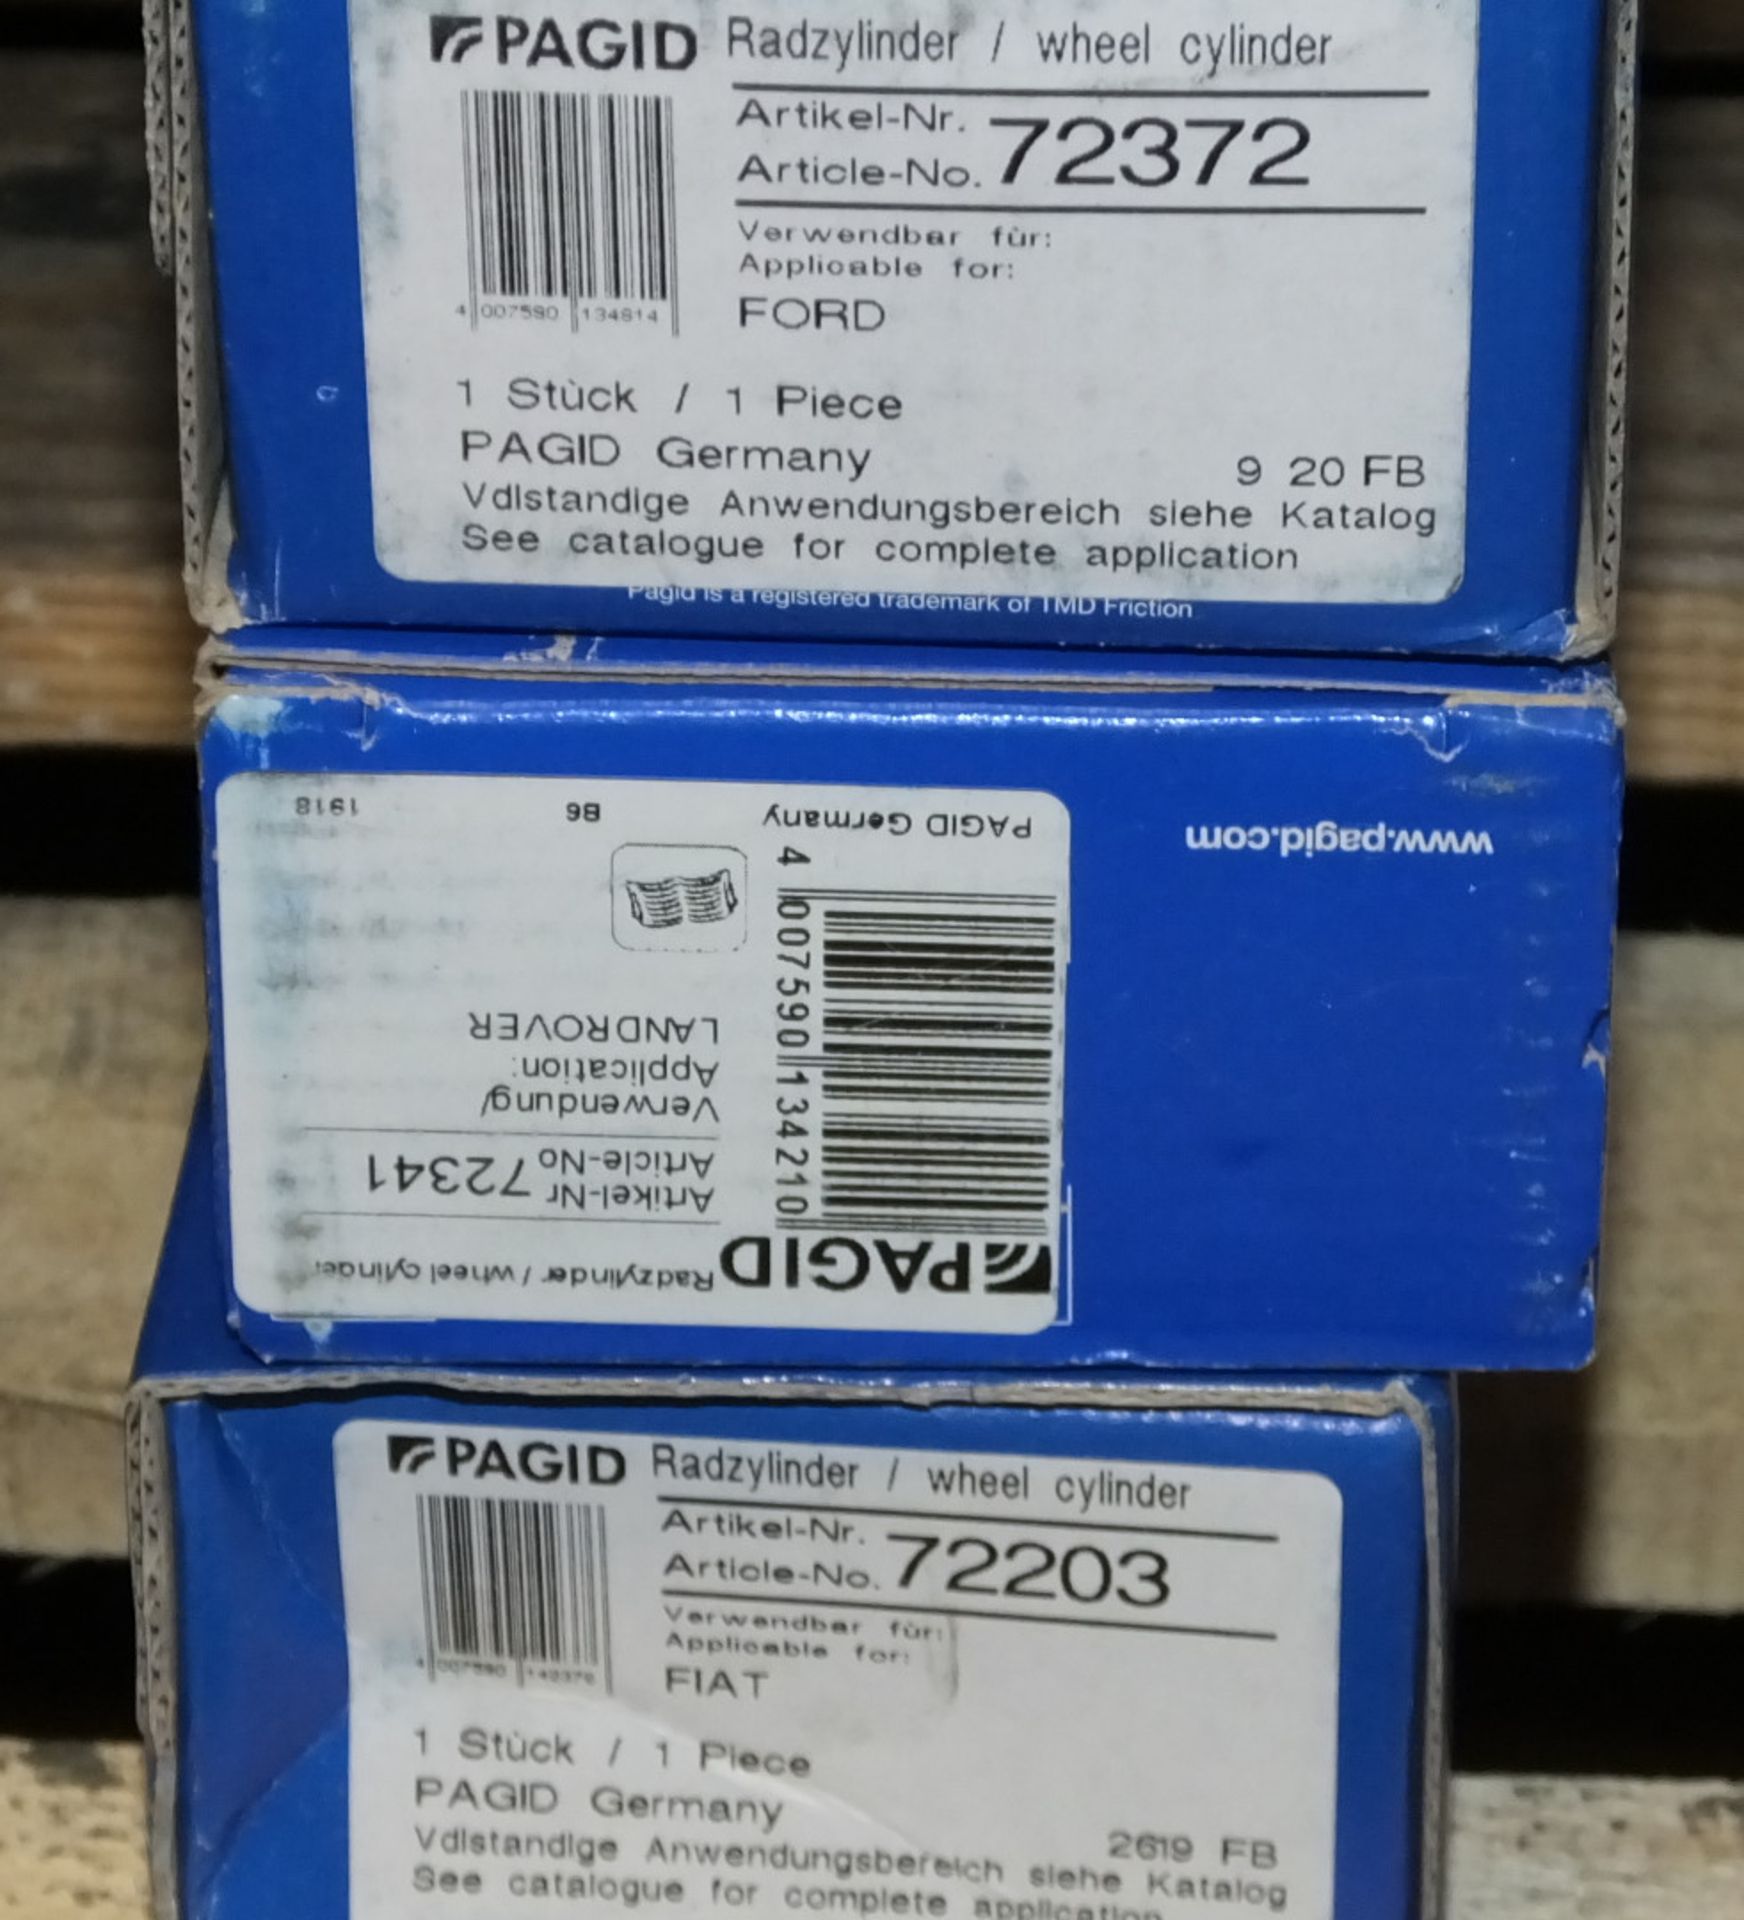 5x Pagid Wheel Cylinders - Please see pictures for examples of model numbers - Image 3 of 3